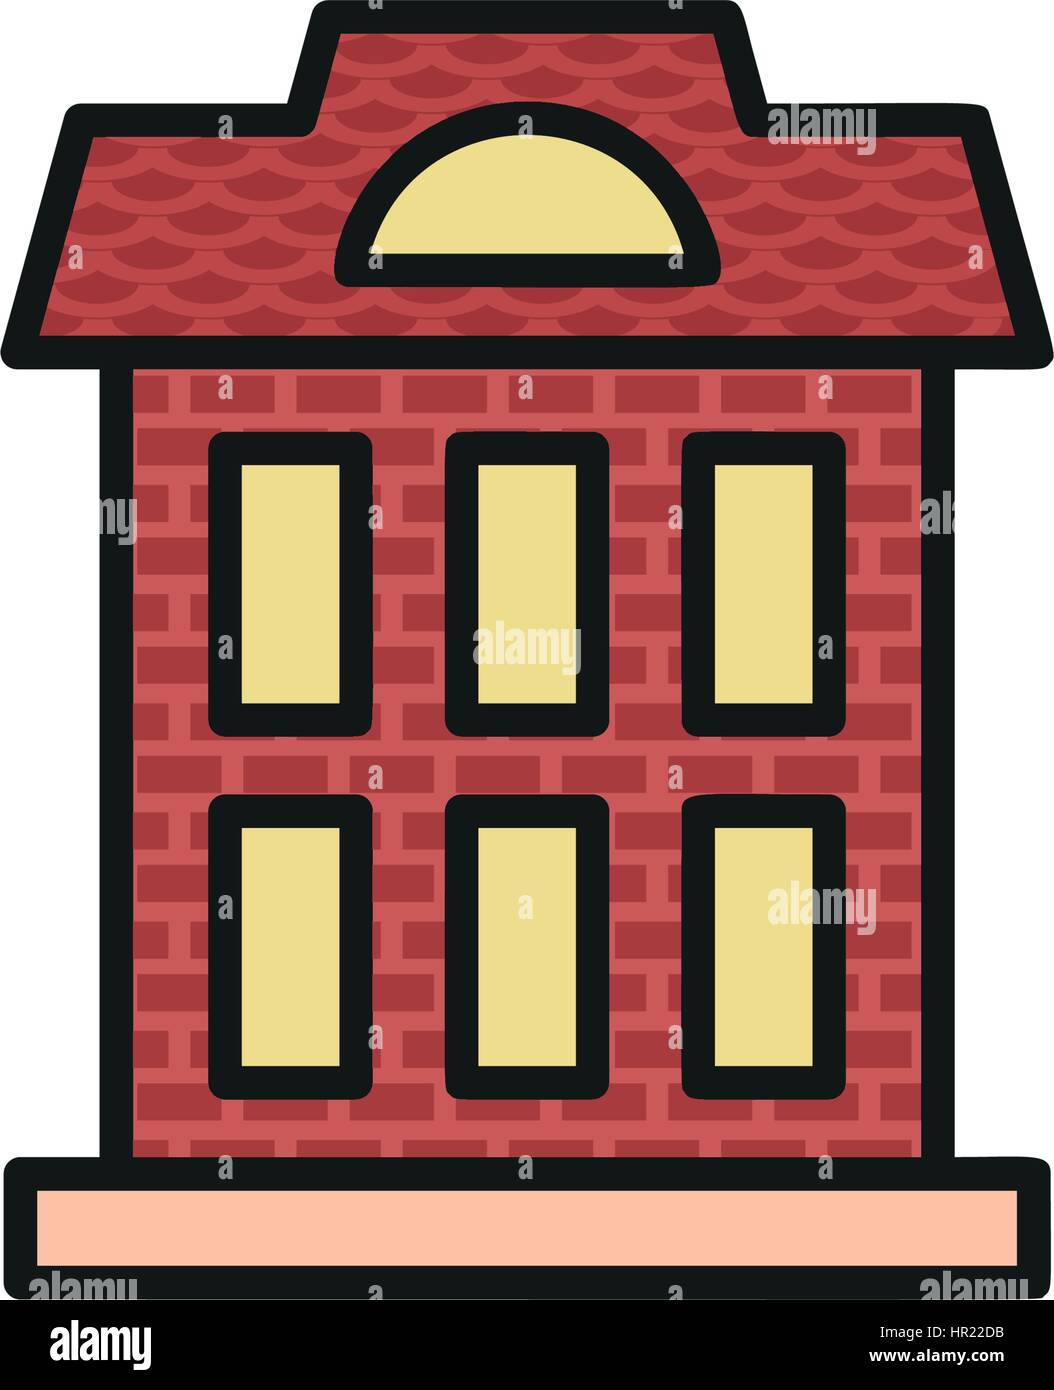 Isolated vinous color low-rise municipal house in lineart style icon, element of urban architectural building vector illustration. Stock Vector